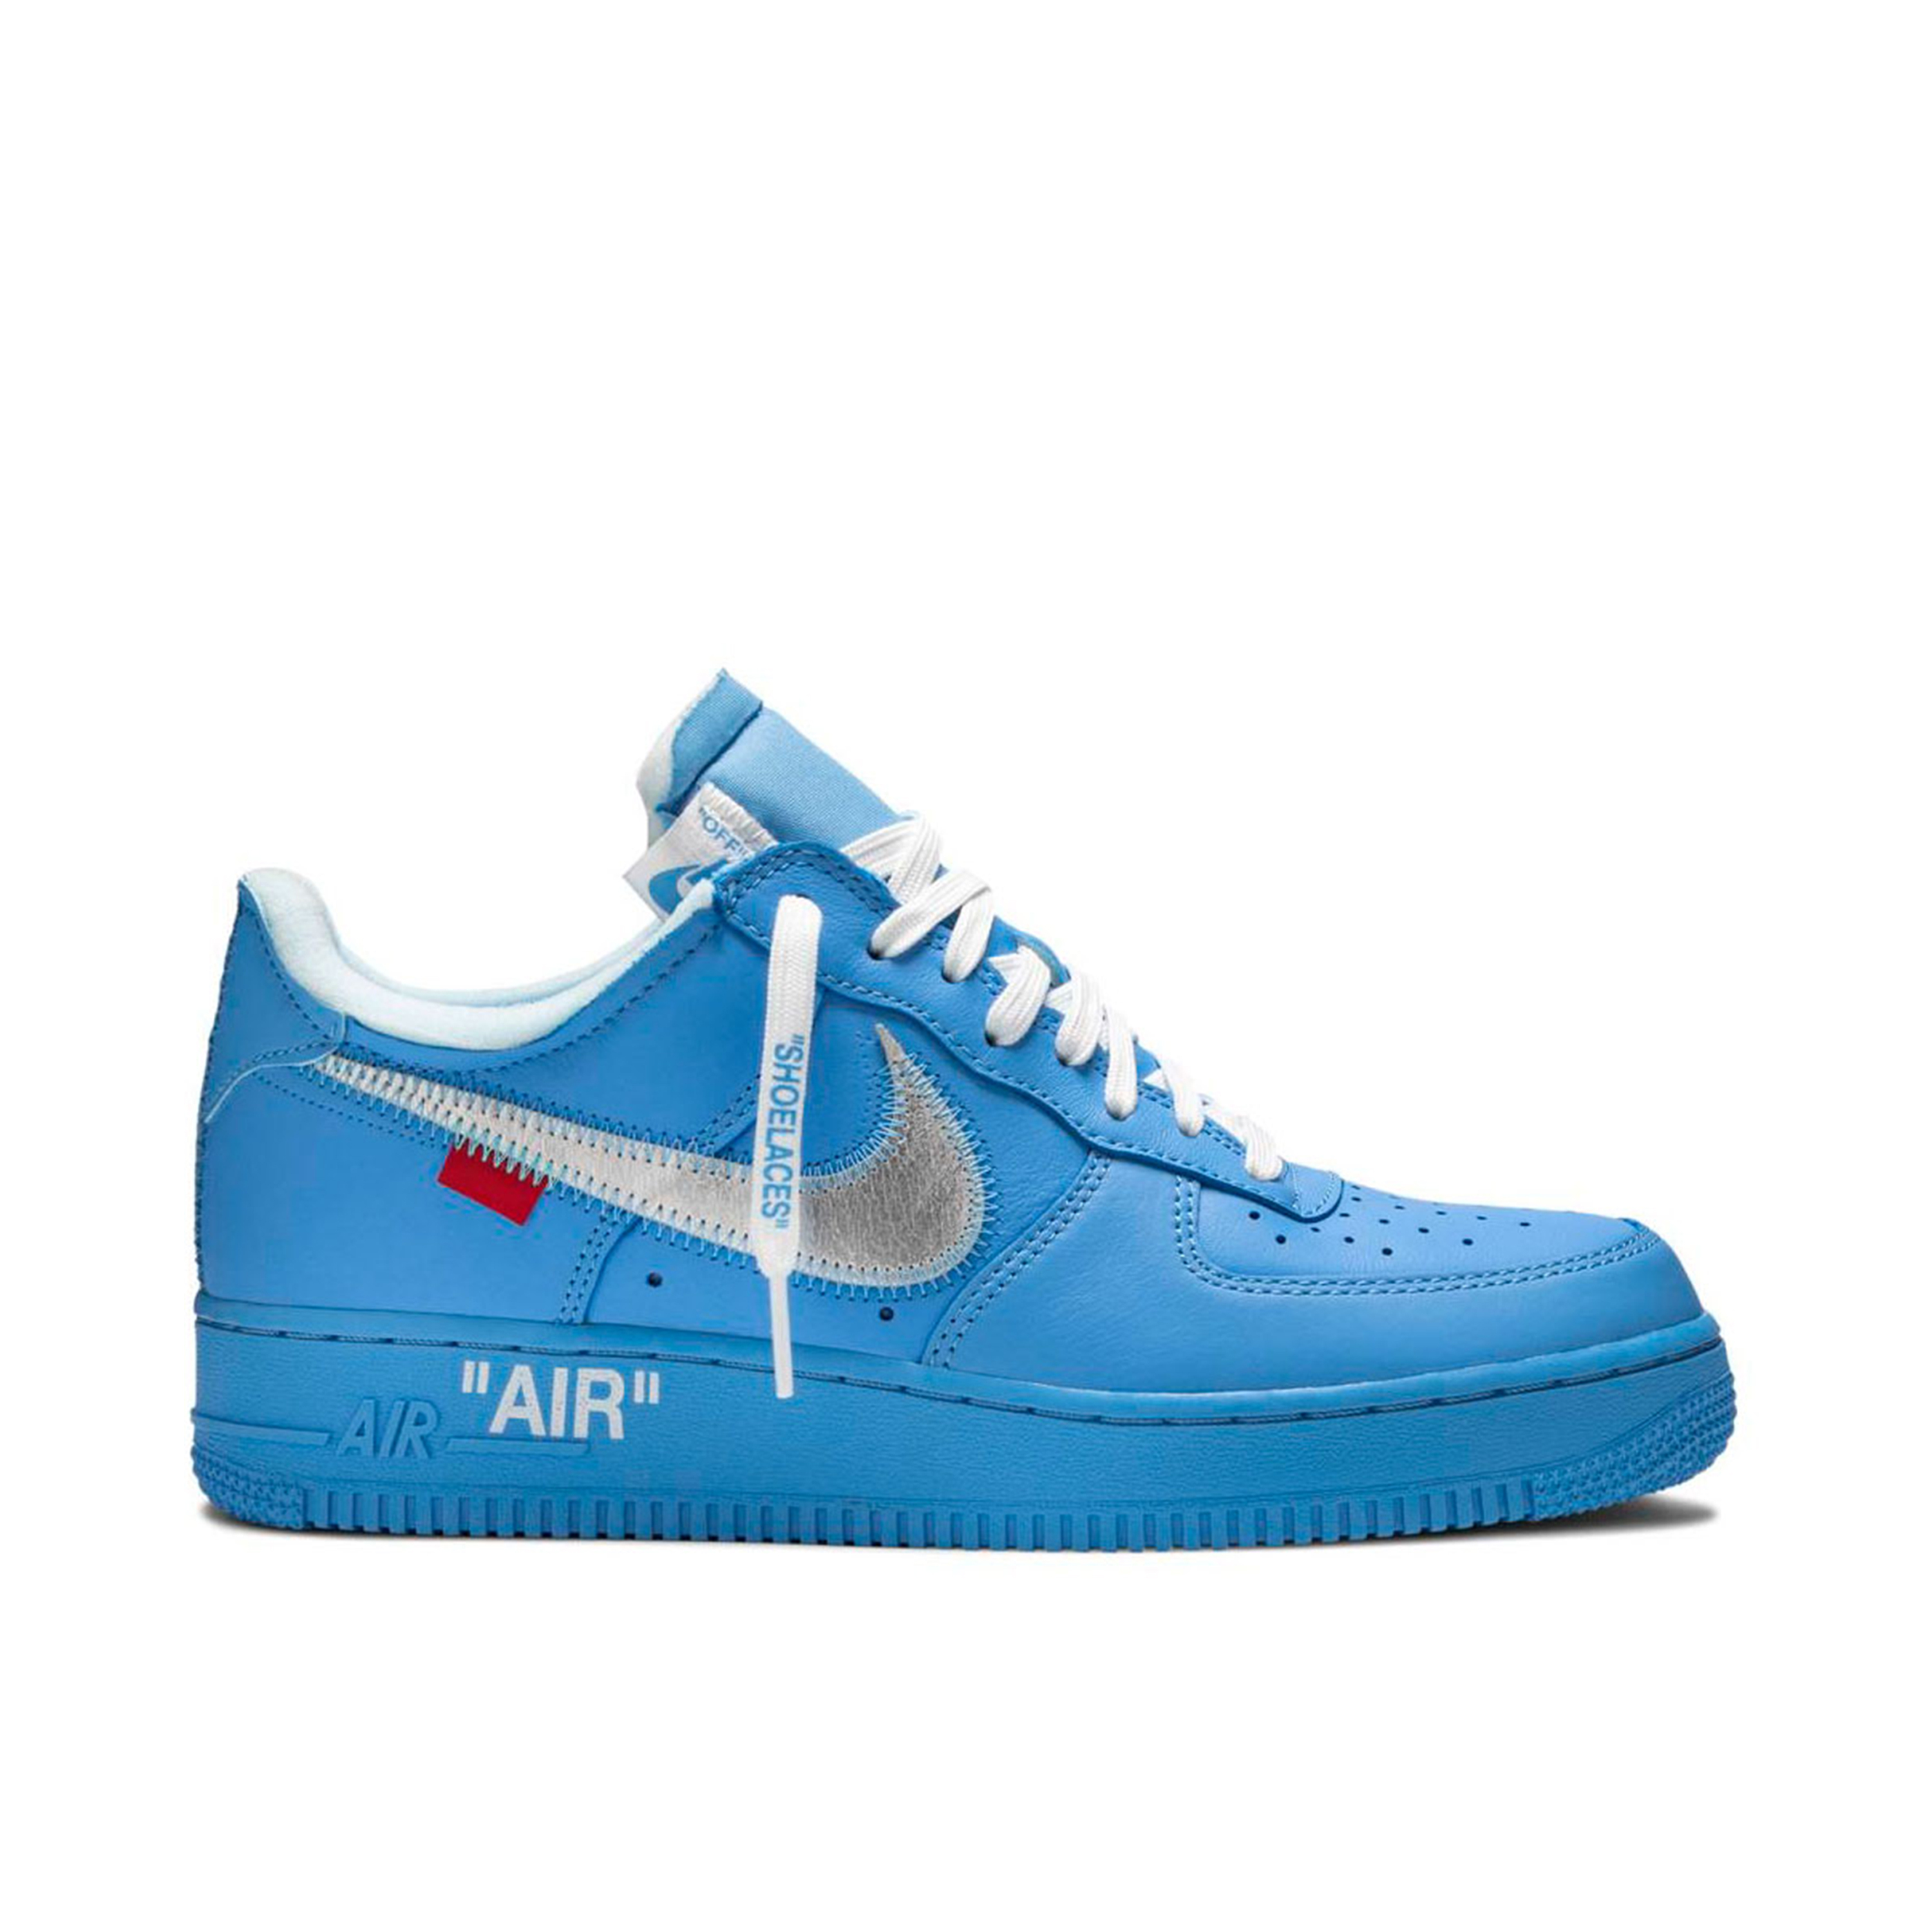 Off-White x Nike Air Force 1 Low MCA University Blue